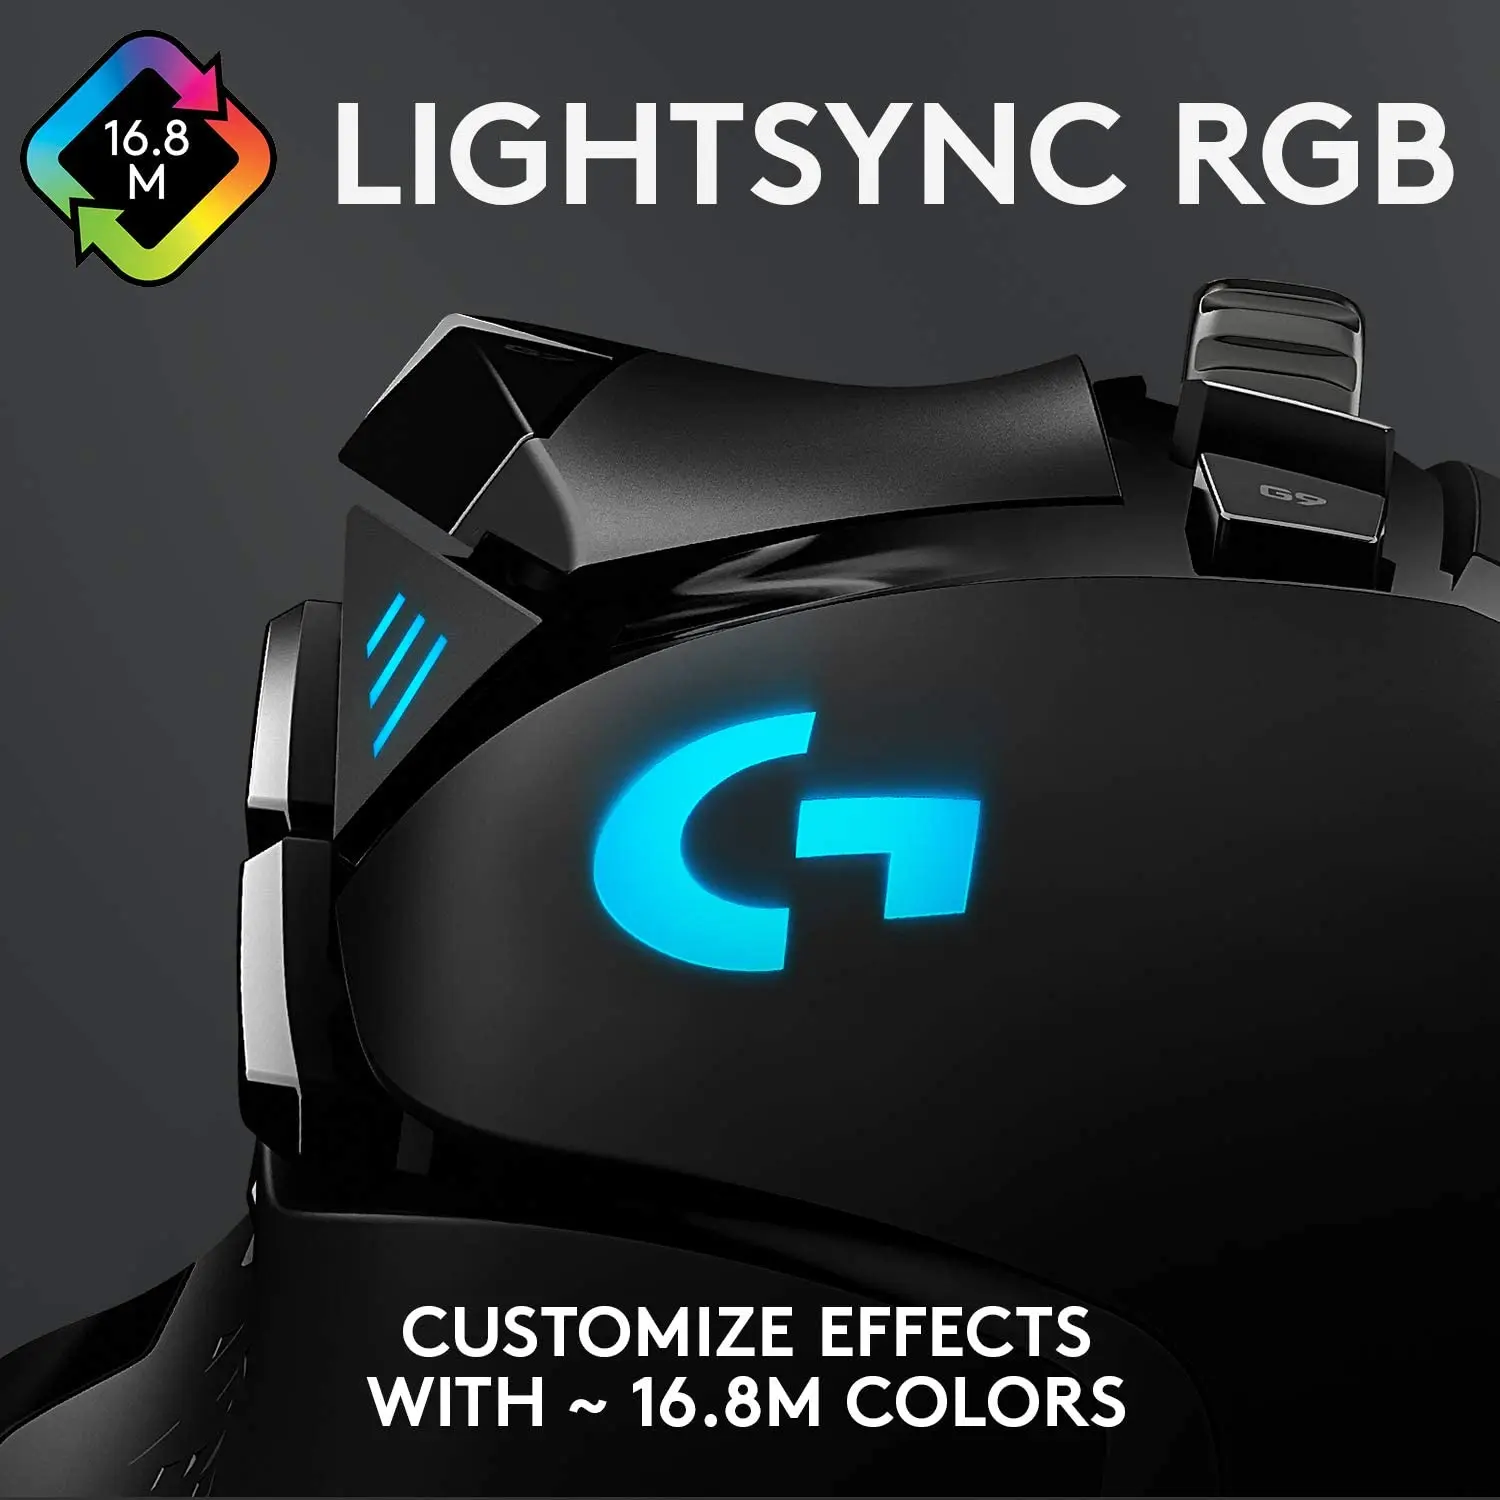 New Logitech G502 HERO KDA LIGHTSYNC RGB Gaming Mouse USB Wired Mice 25600 DPI Adjustable Programming Mice for Mouse Gamer